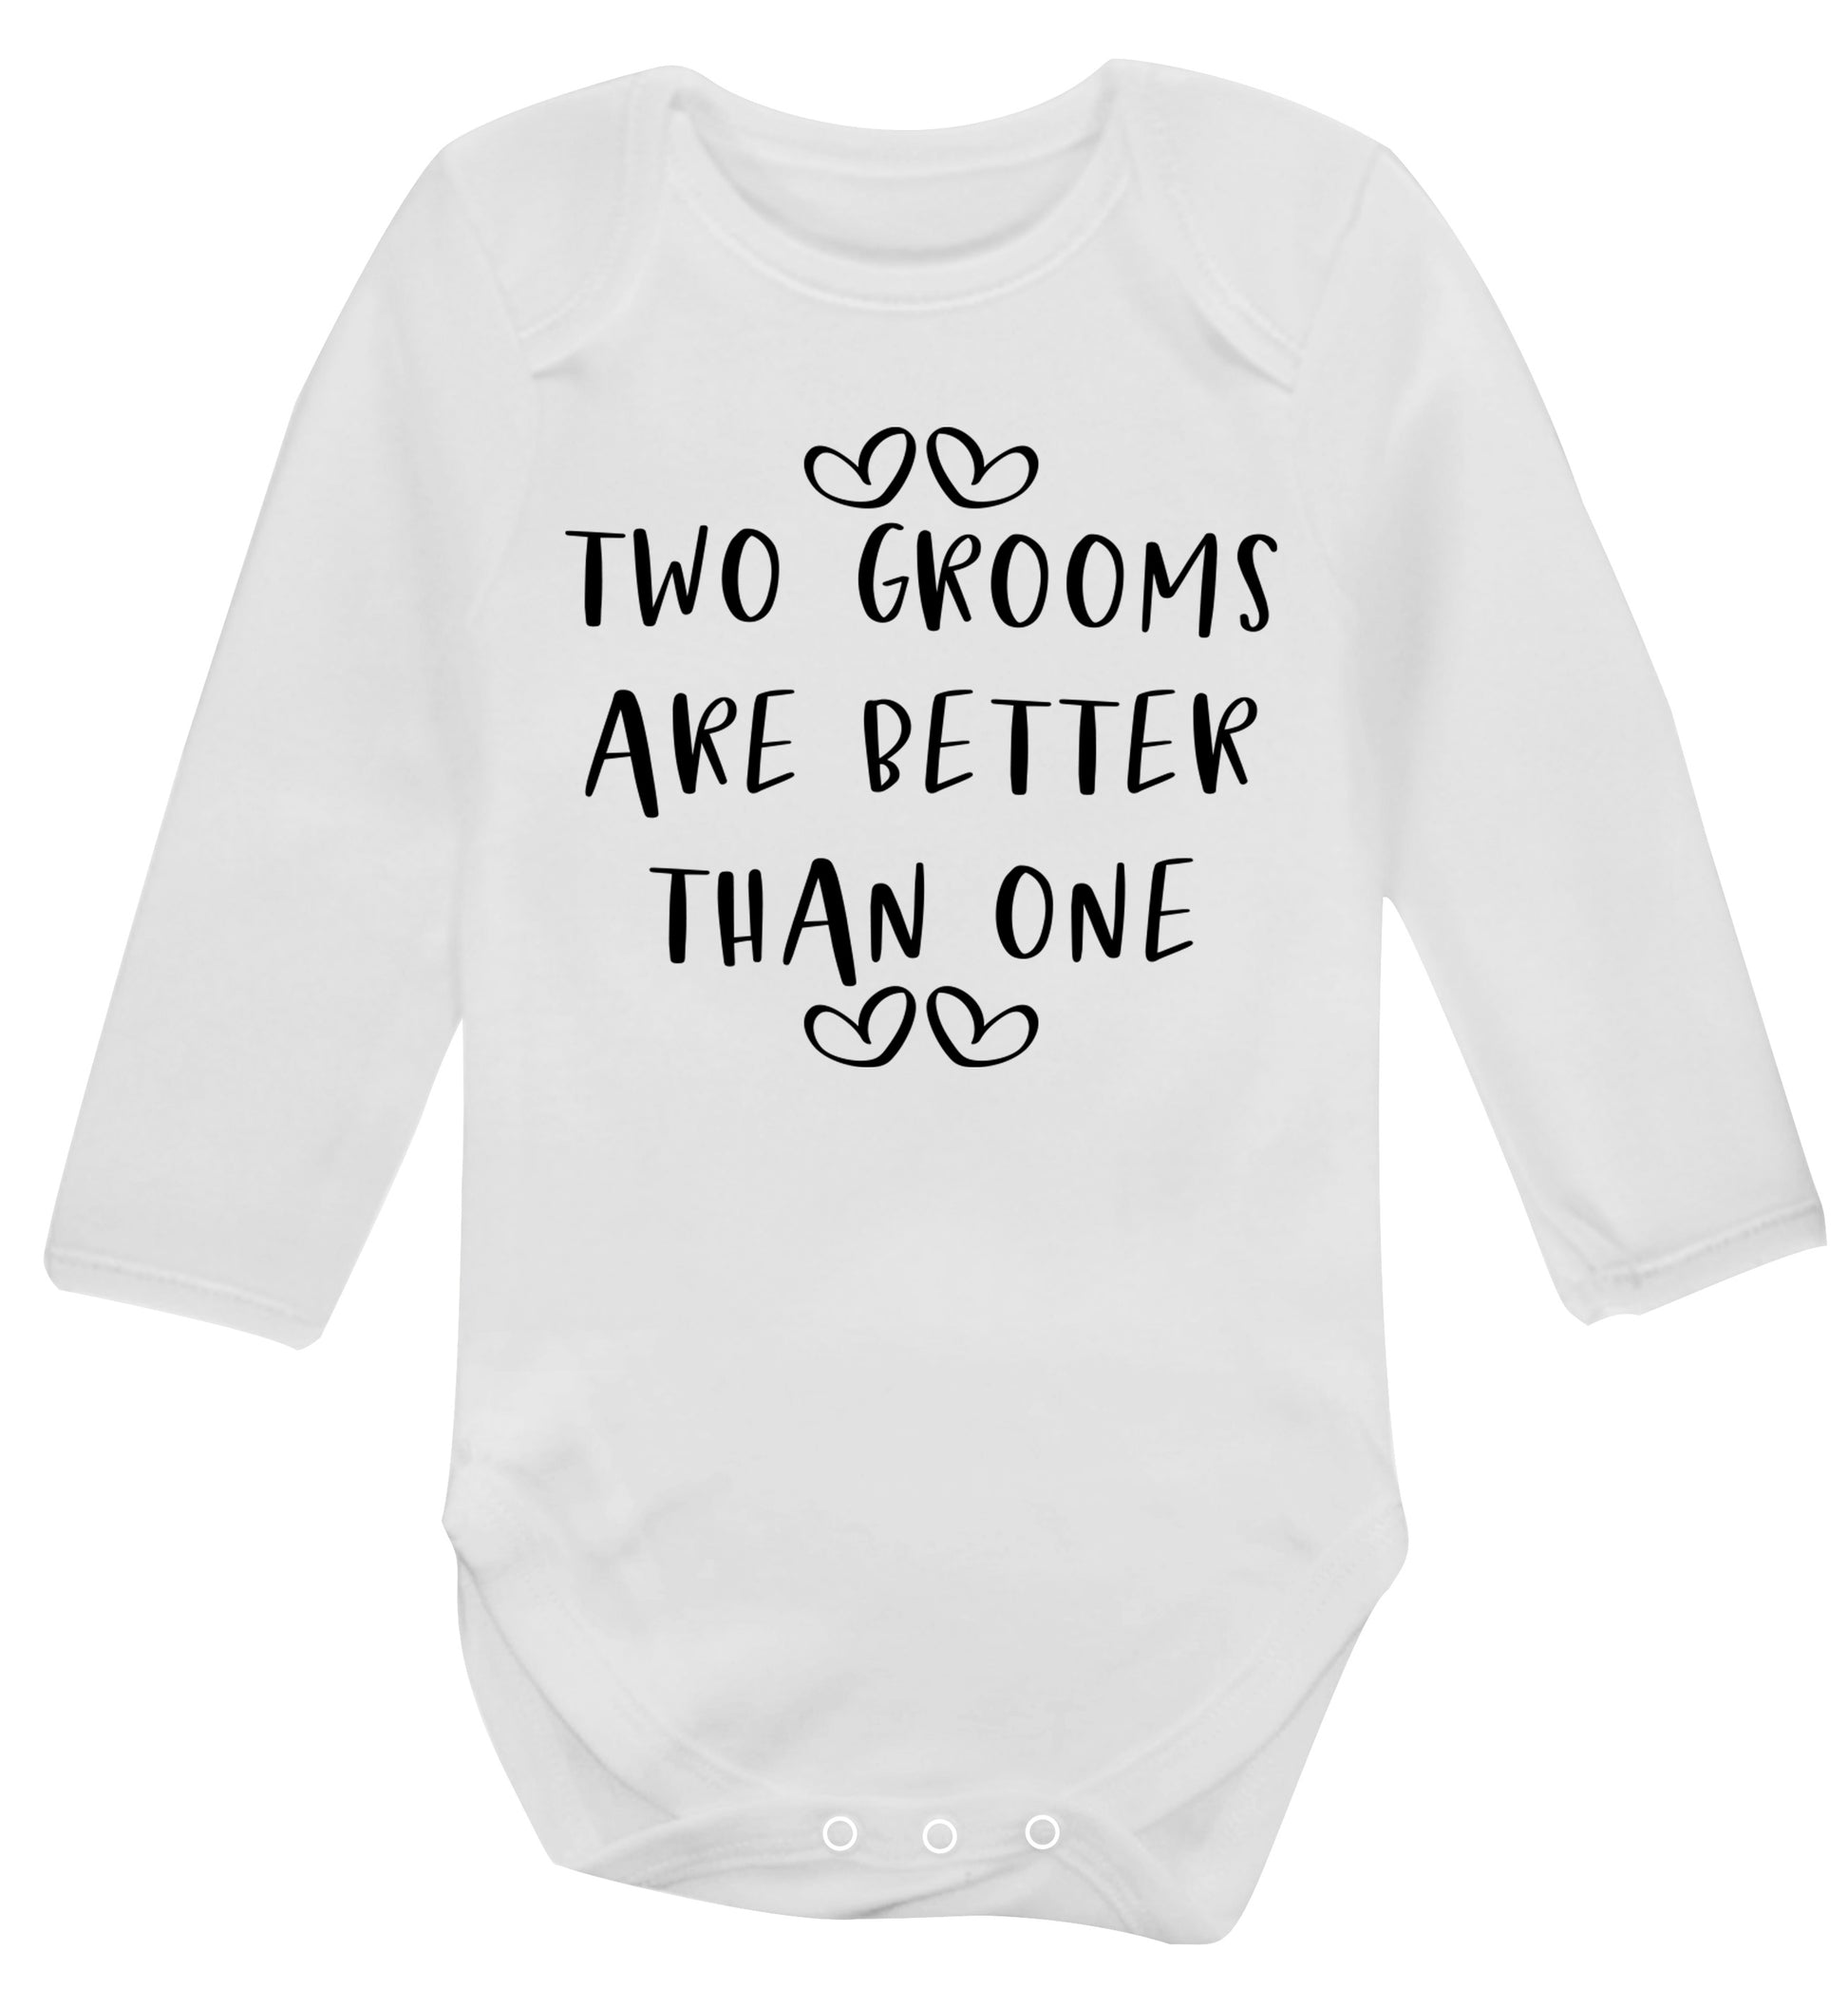 Two grooms are better than one baby vest long sleeved white 6-12 months